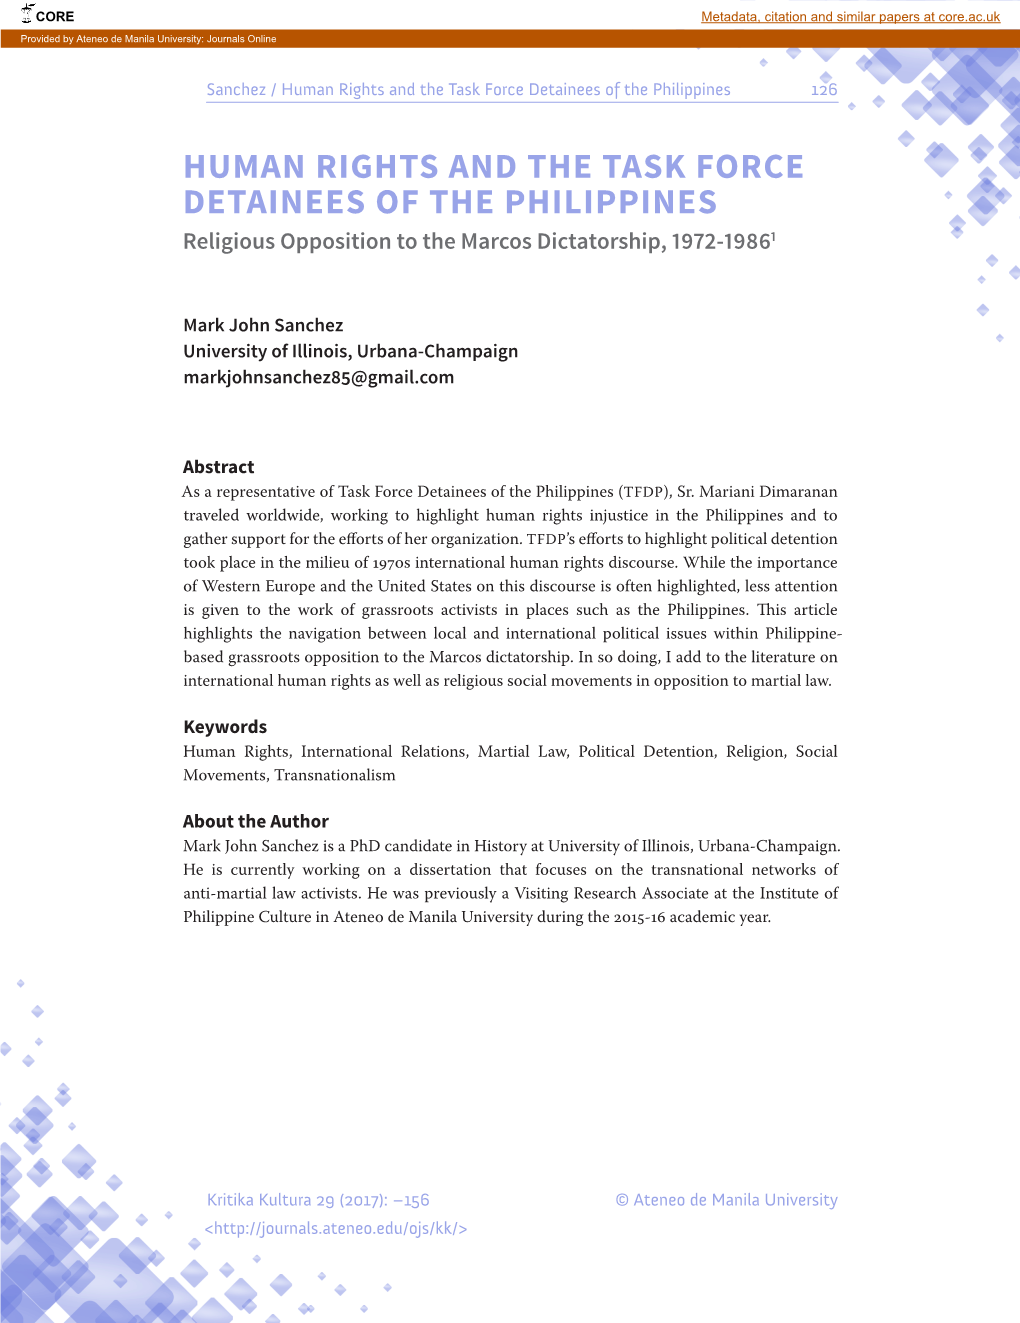 Human Rights and the Task Force Detainees of the Philippines 126